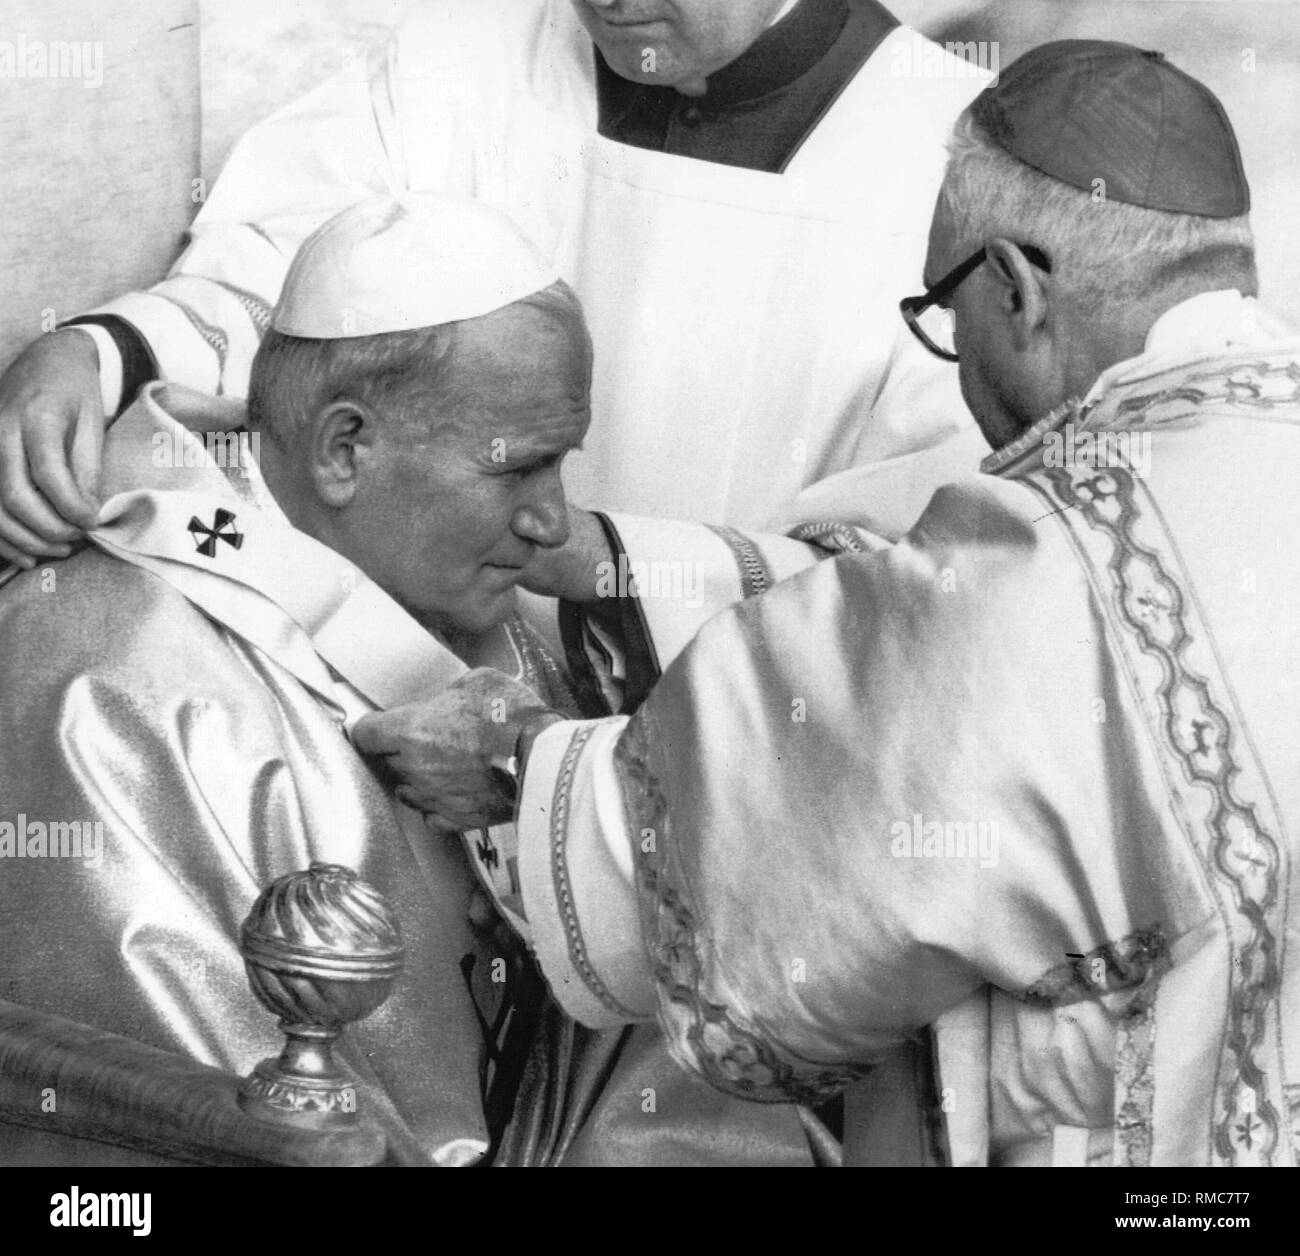 The Italian Cardinal Ferici (right) puts the pallium on the new Pope John Paul II, as a sign of his papacy. Stock Photo